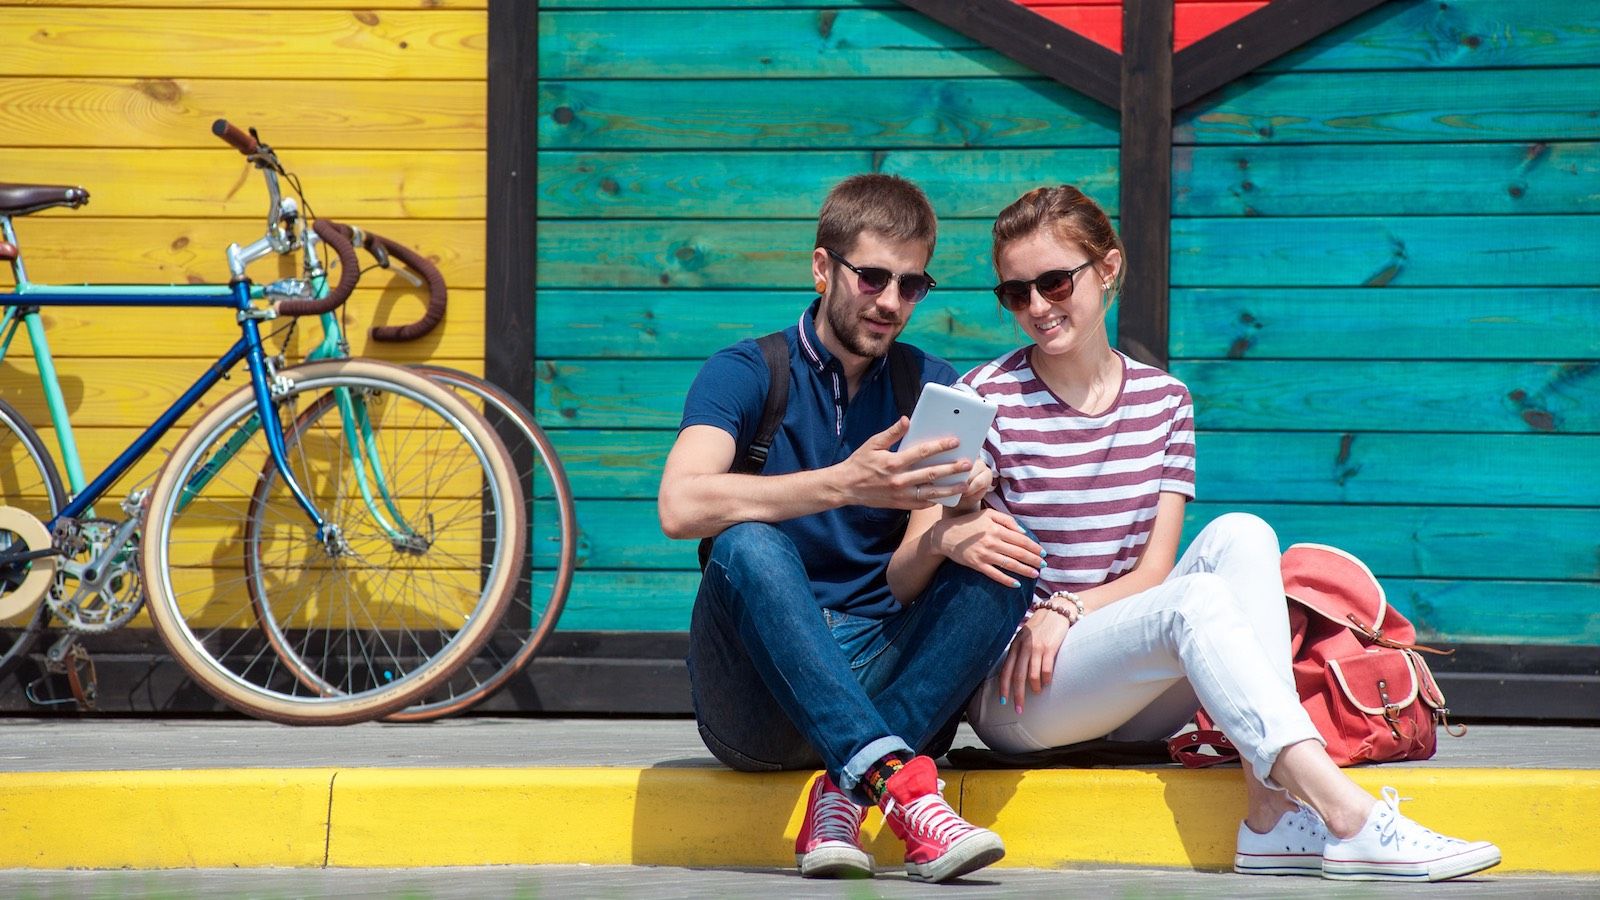 Couple looking at phone sitting on curb